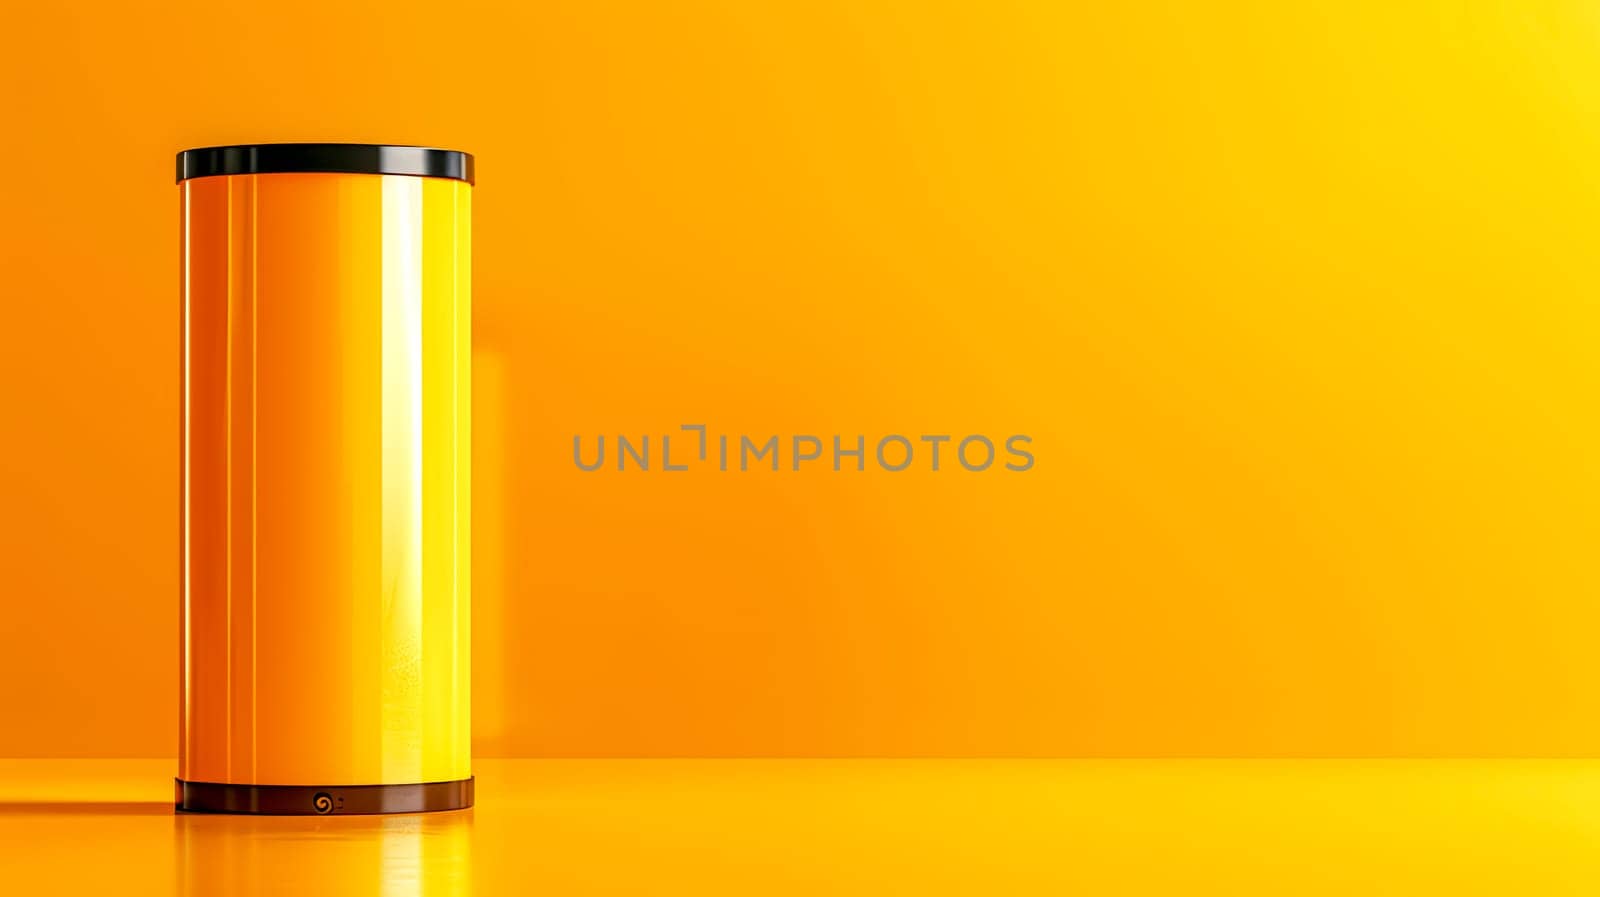 An amber cylinder is resting on a surface painted in shades of yellow, creating a contrast. The cylinder may be made of metal and resembles a drinkware or a light fixture